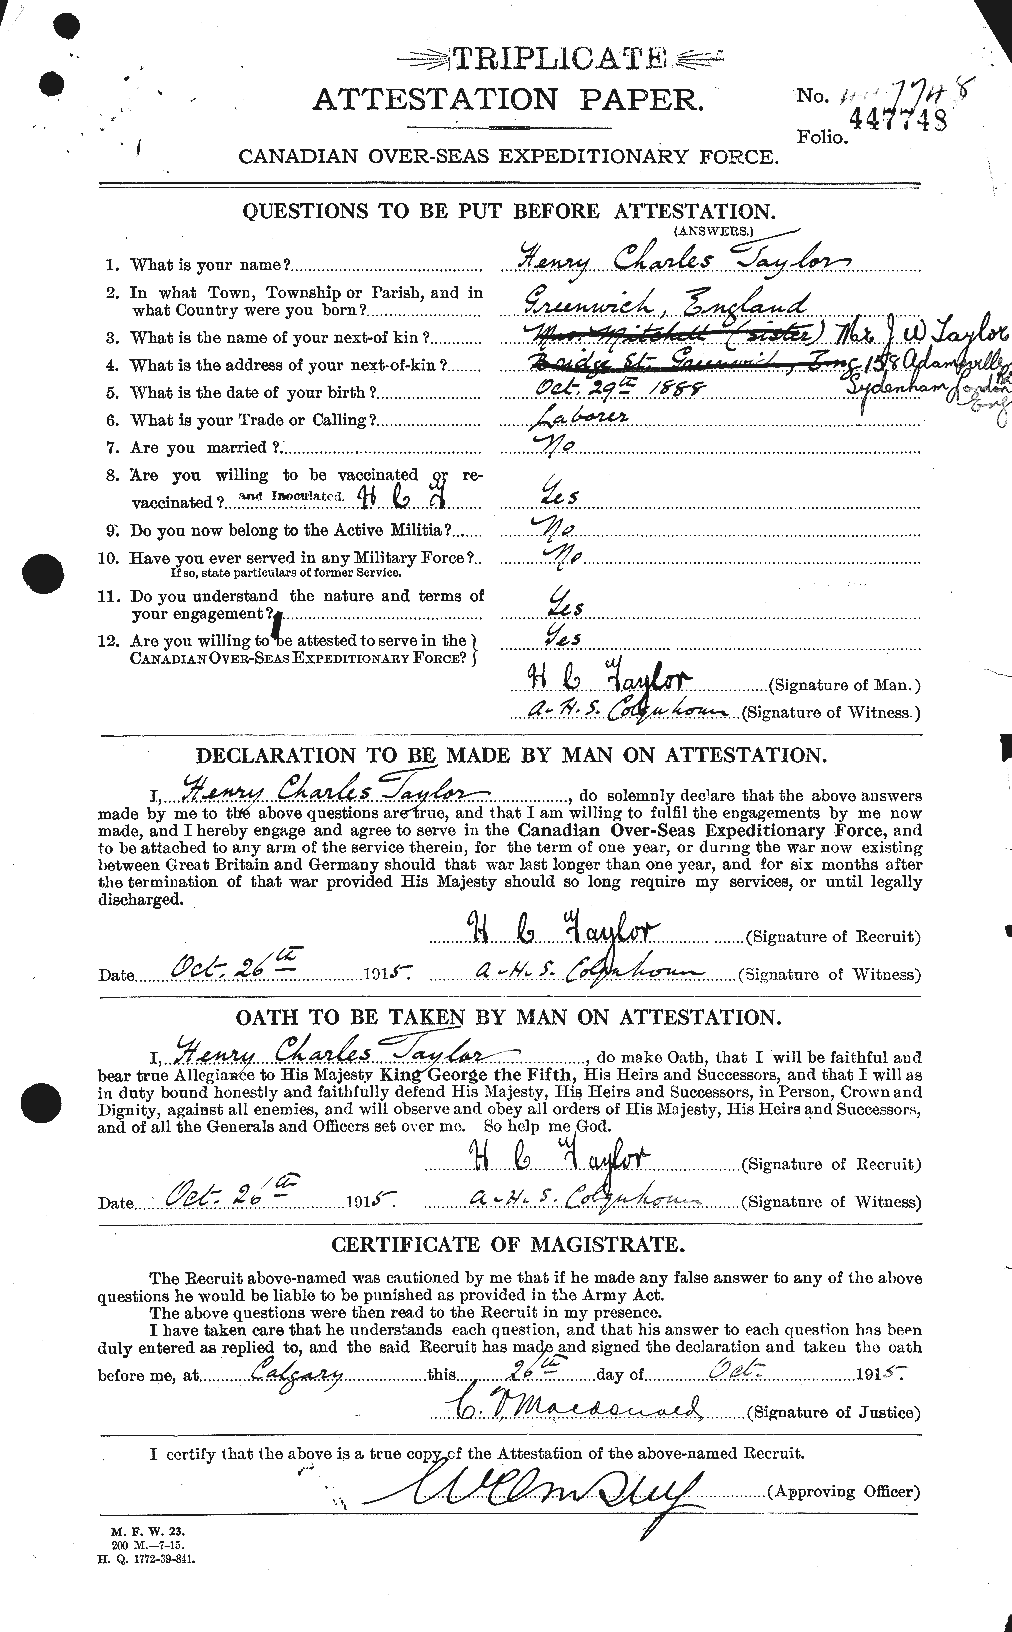 Personnel Records of the First World War - CEF 626530a